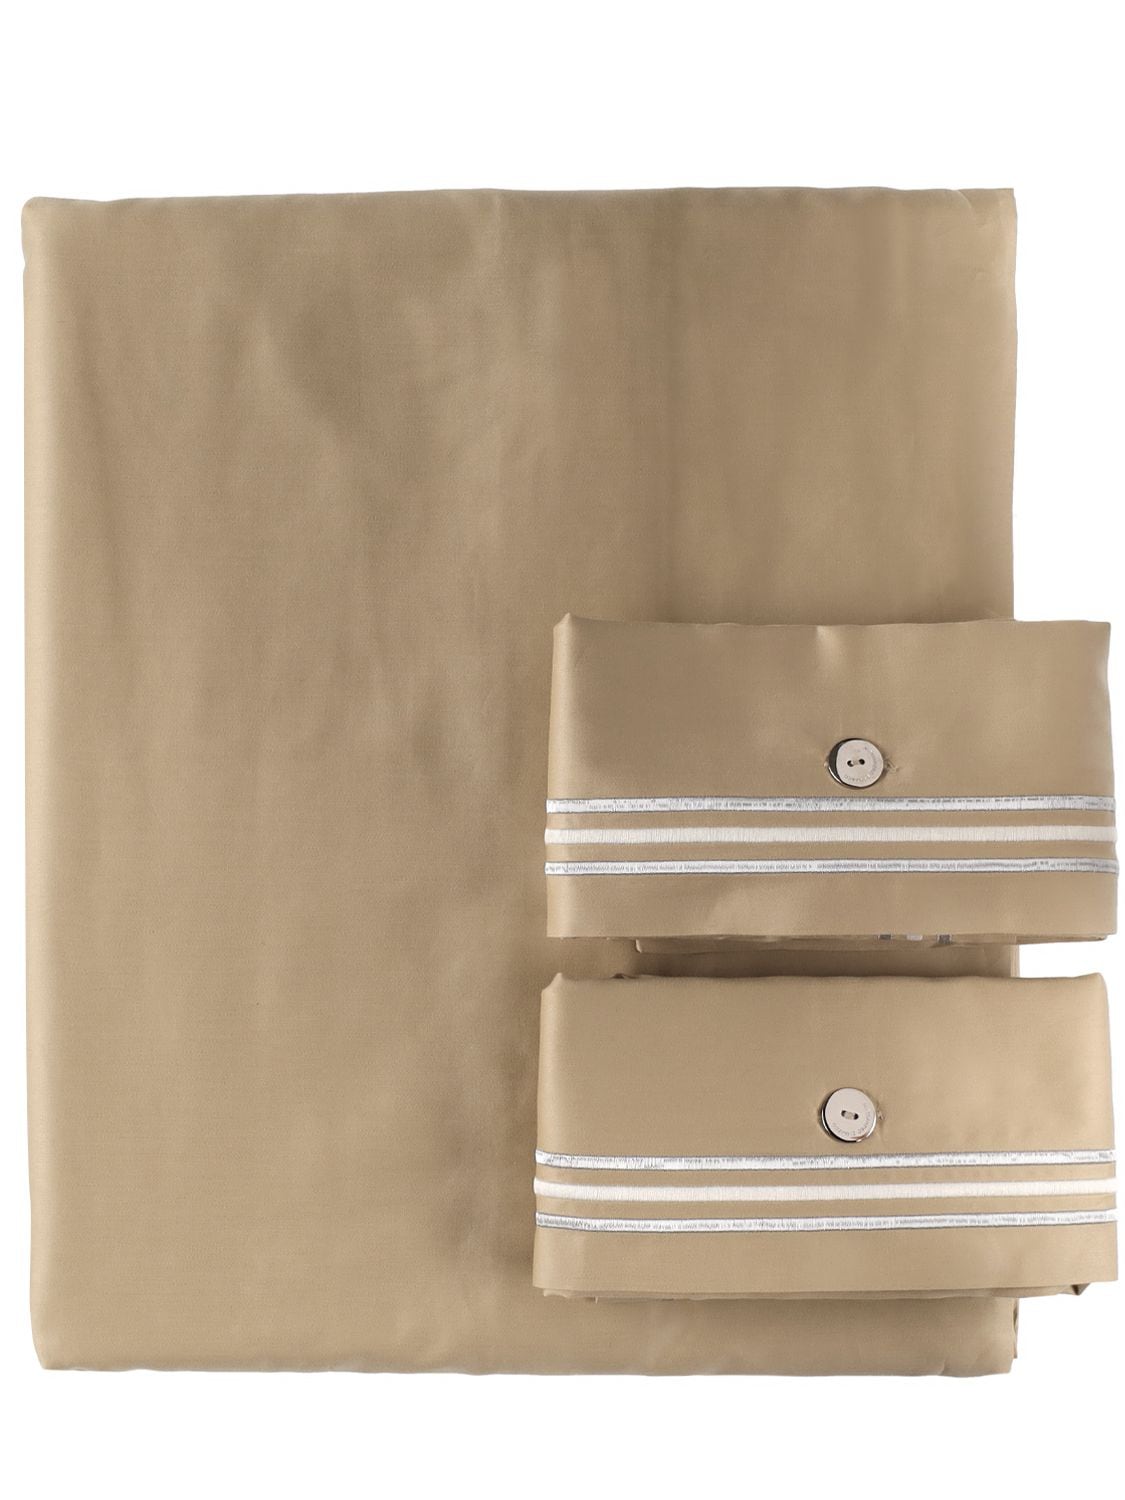 Alessandro Di Marco Duvet Cover & Pillowcases Set In Beige